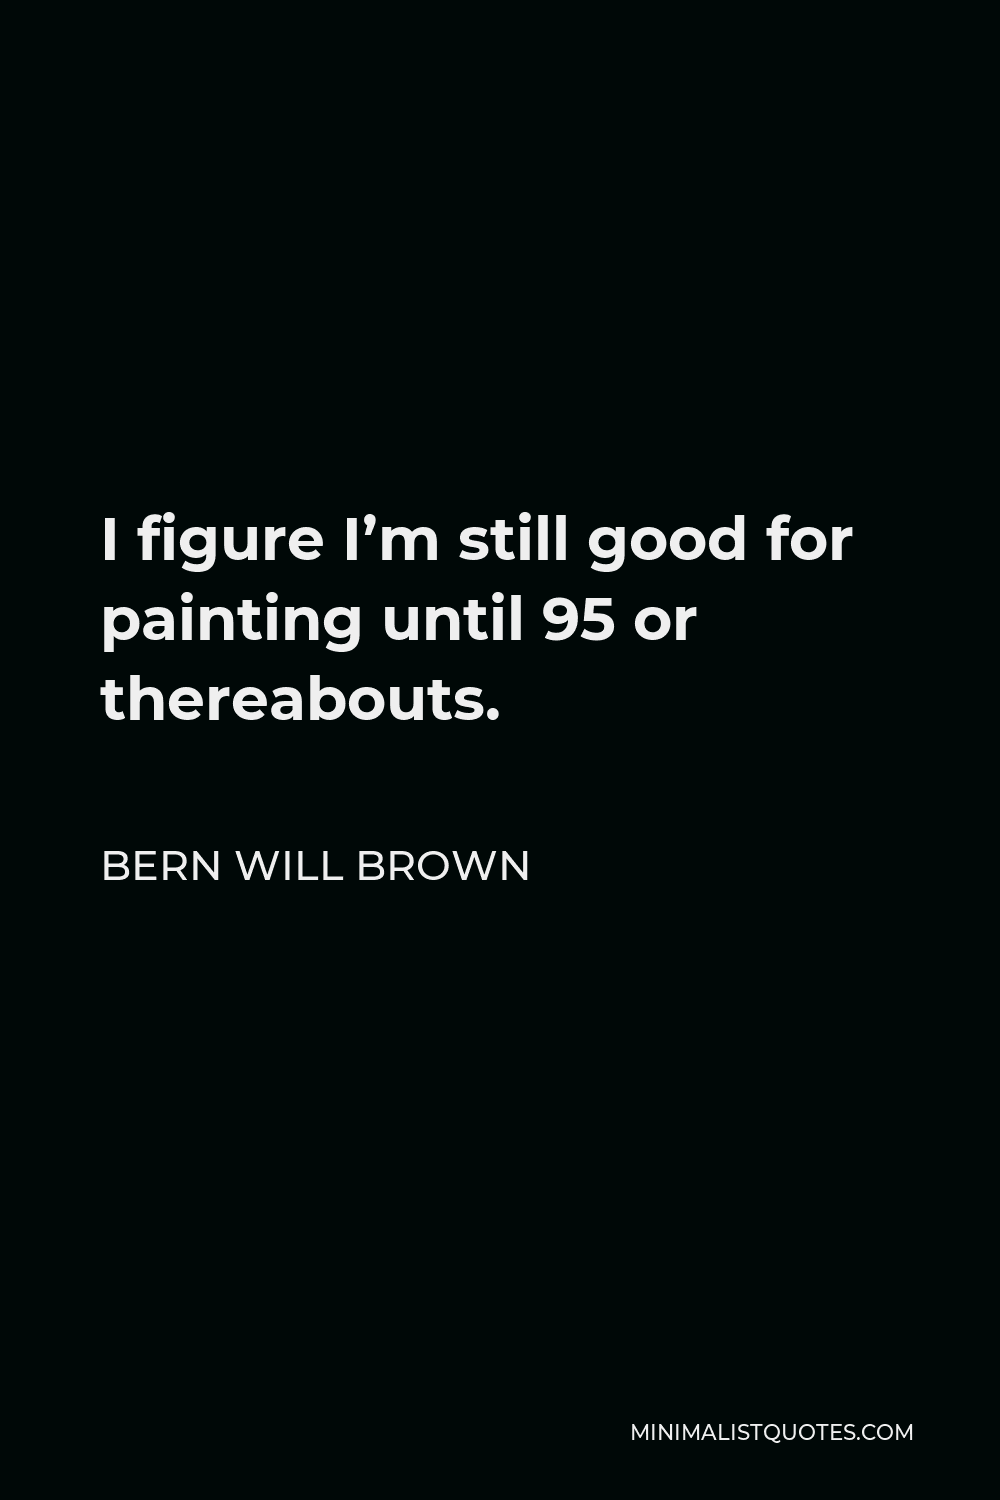 Bern Will Brown Quote - I figure I’m still good for painting until 95 or thereabouts.